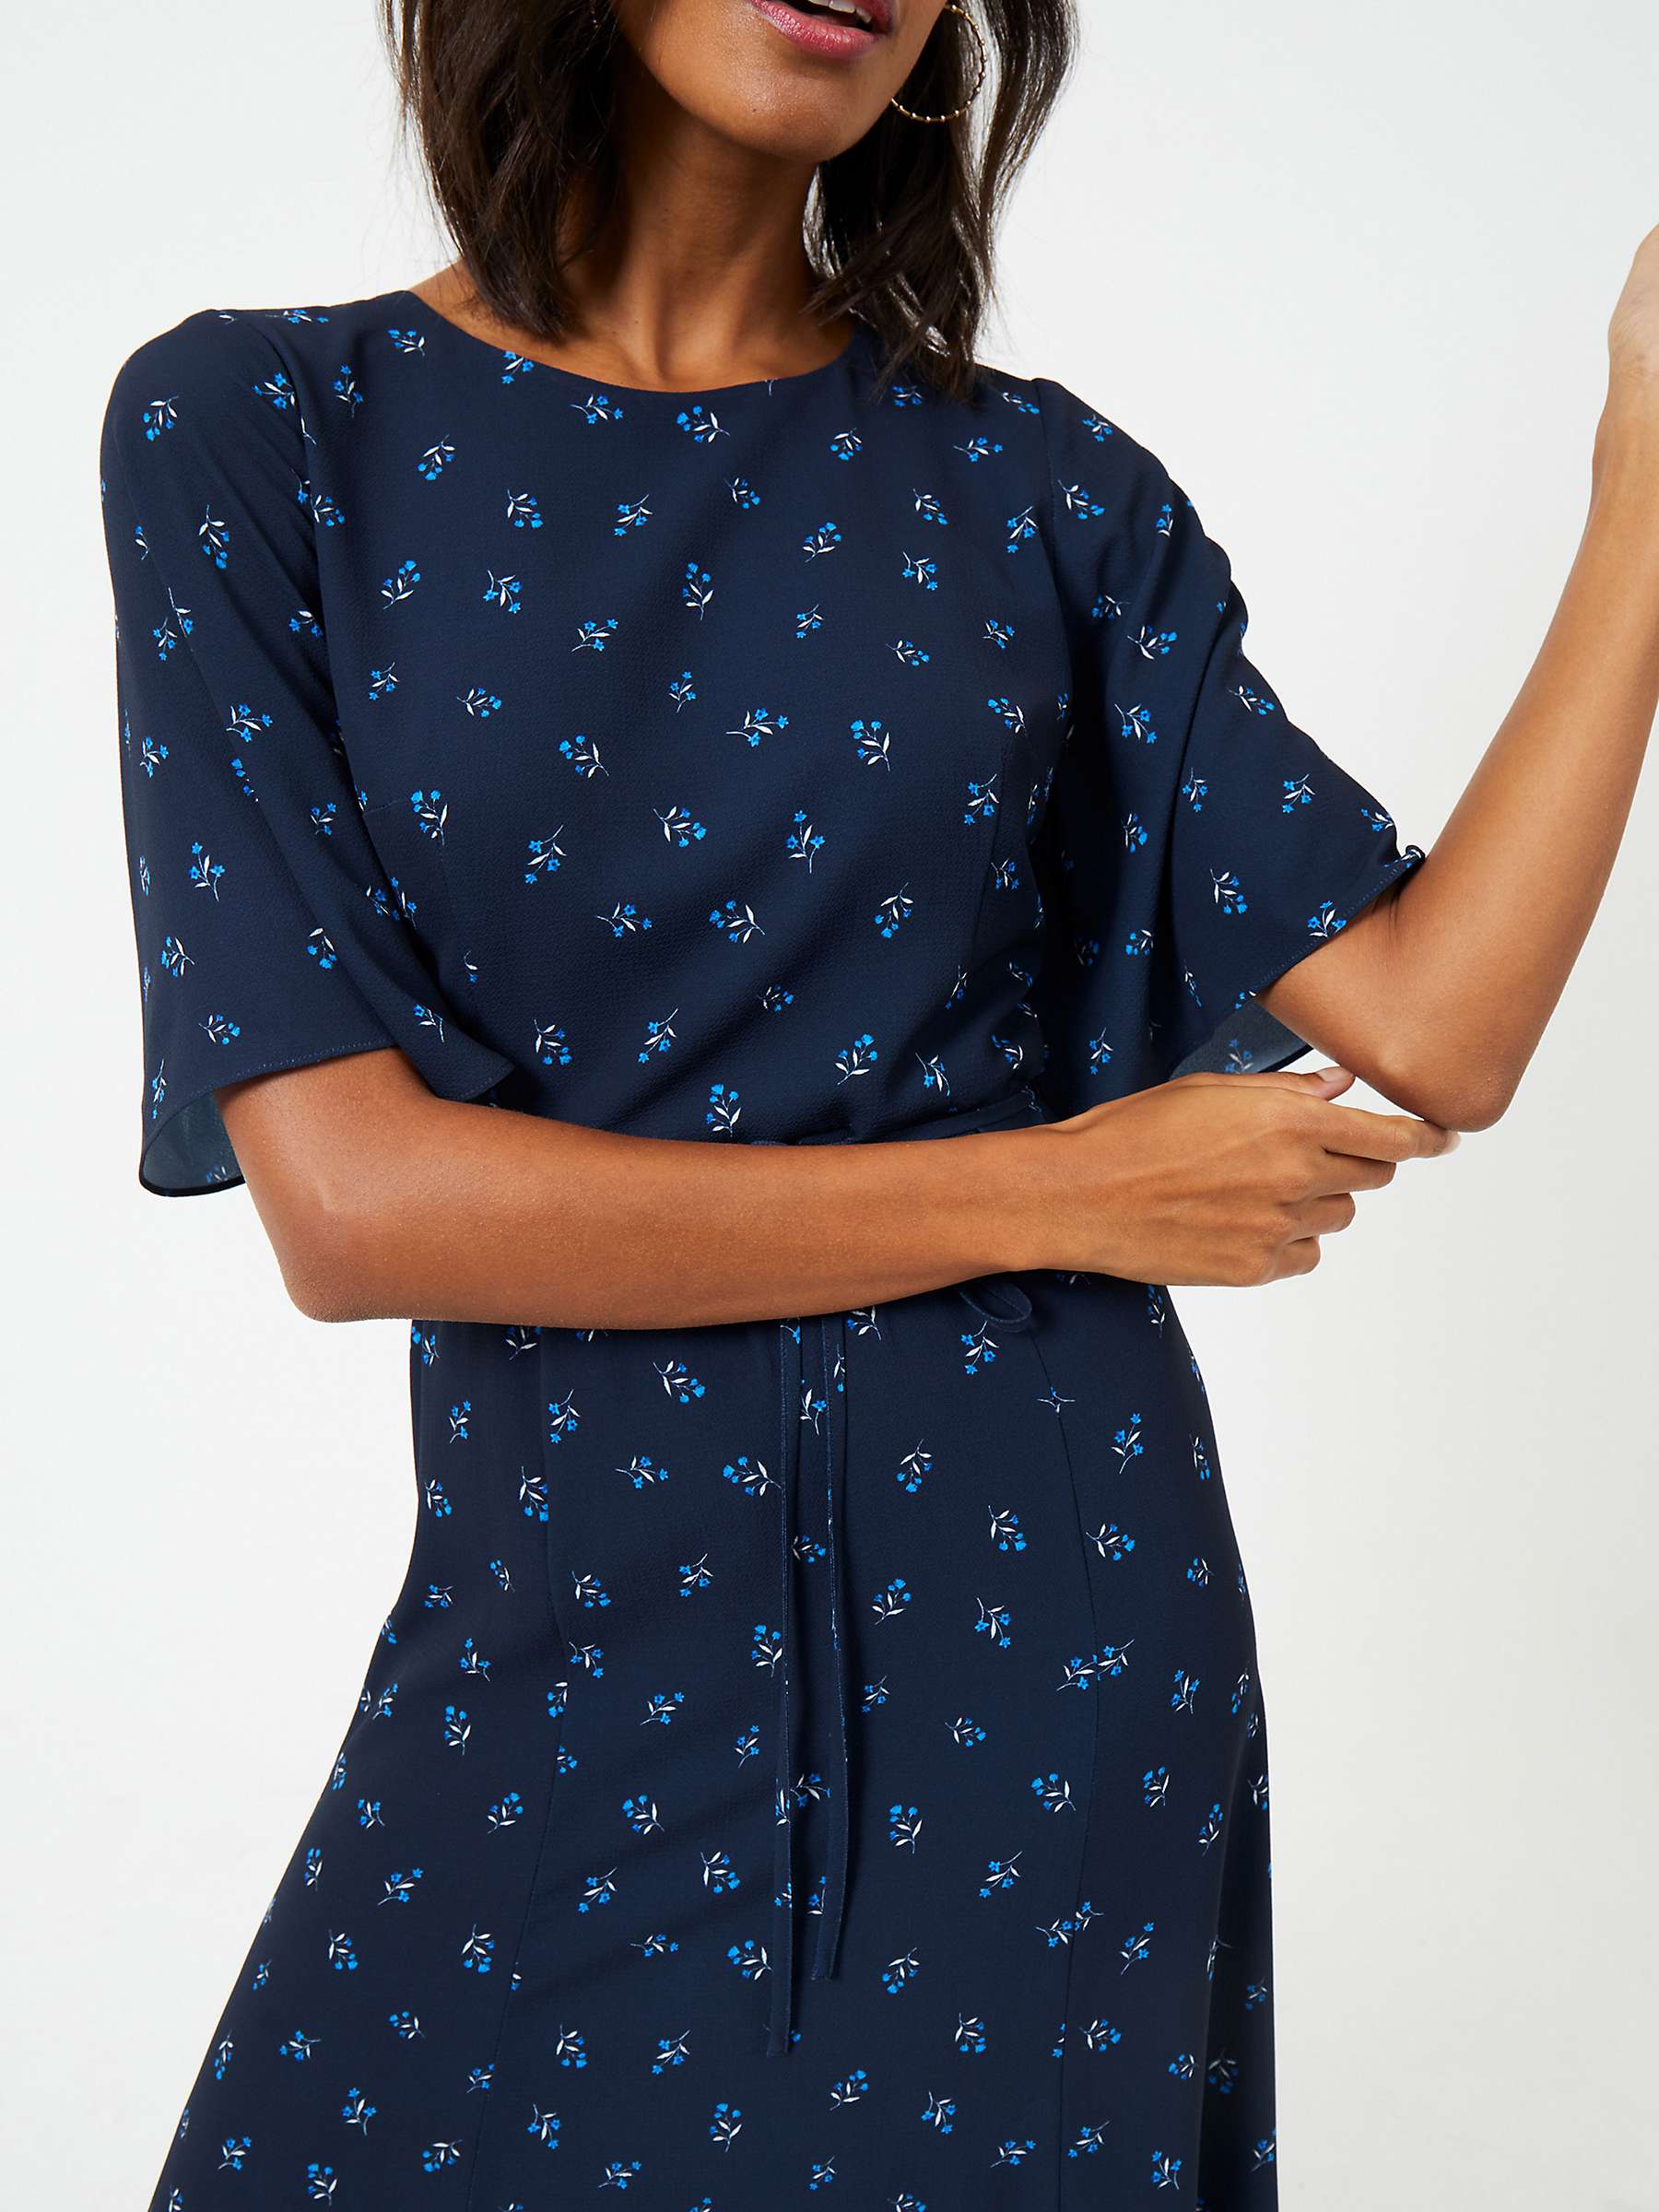 Buy French Connection Cecilia Deplhine Midi Dress, Marine Online at johnlewis.com